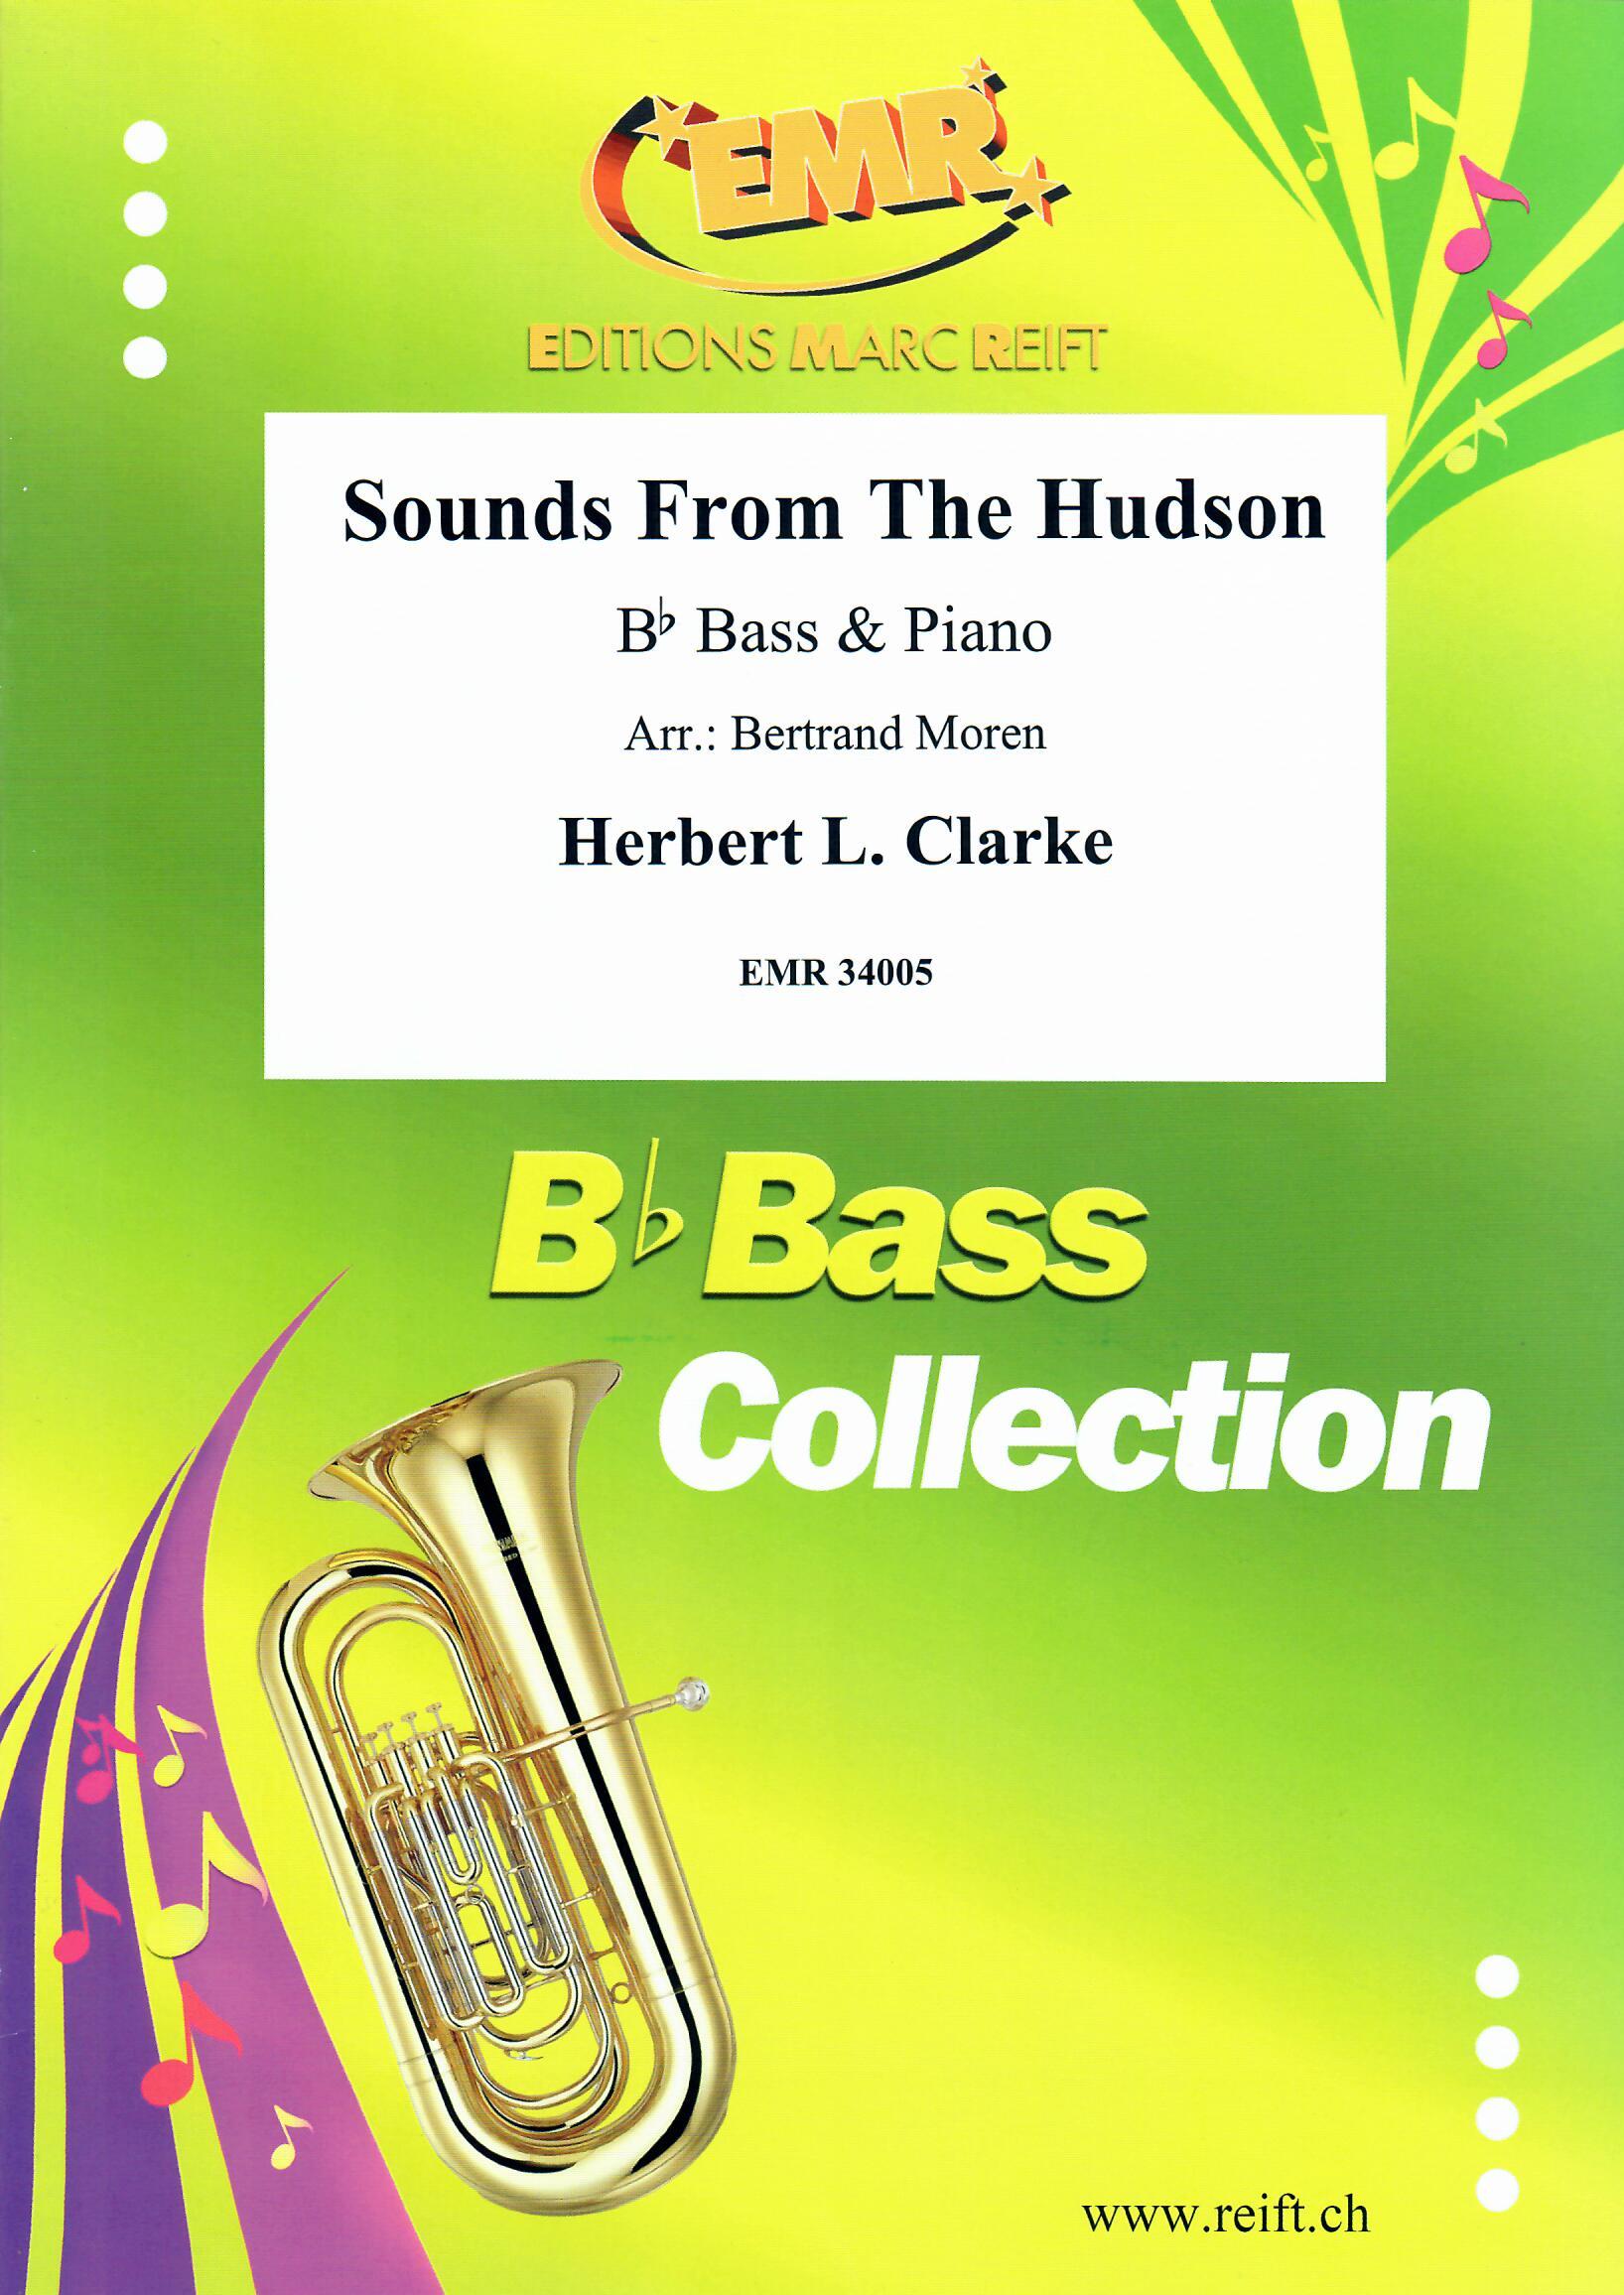 SOUNDS FROM THE HUDSON, SOLOS - E♭. Bass